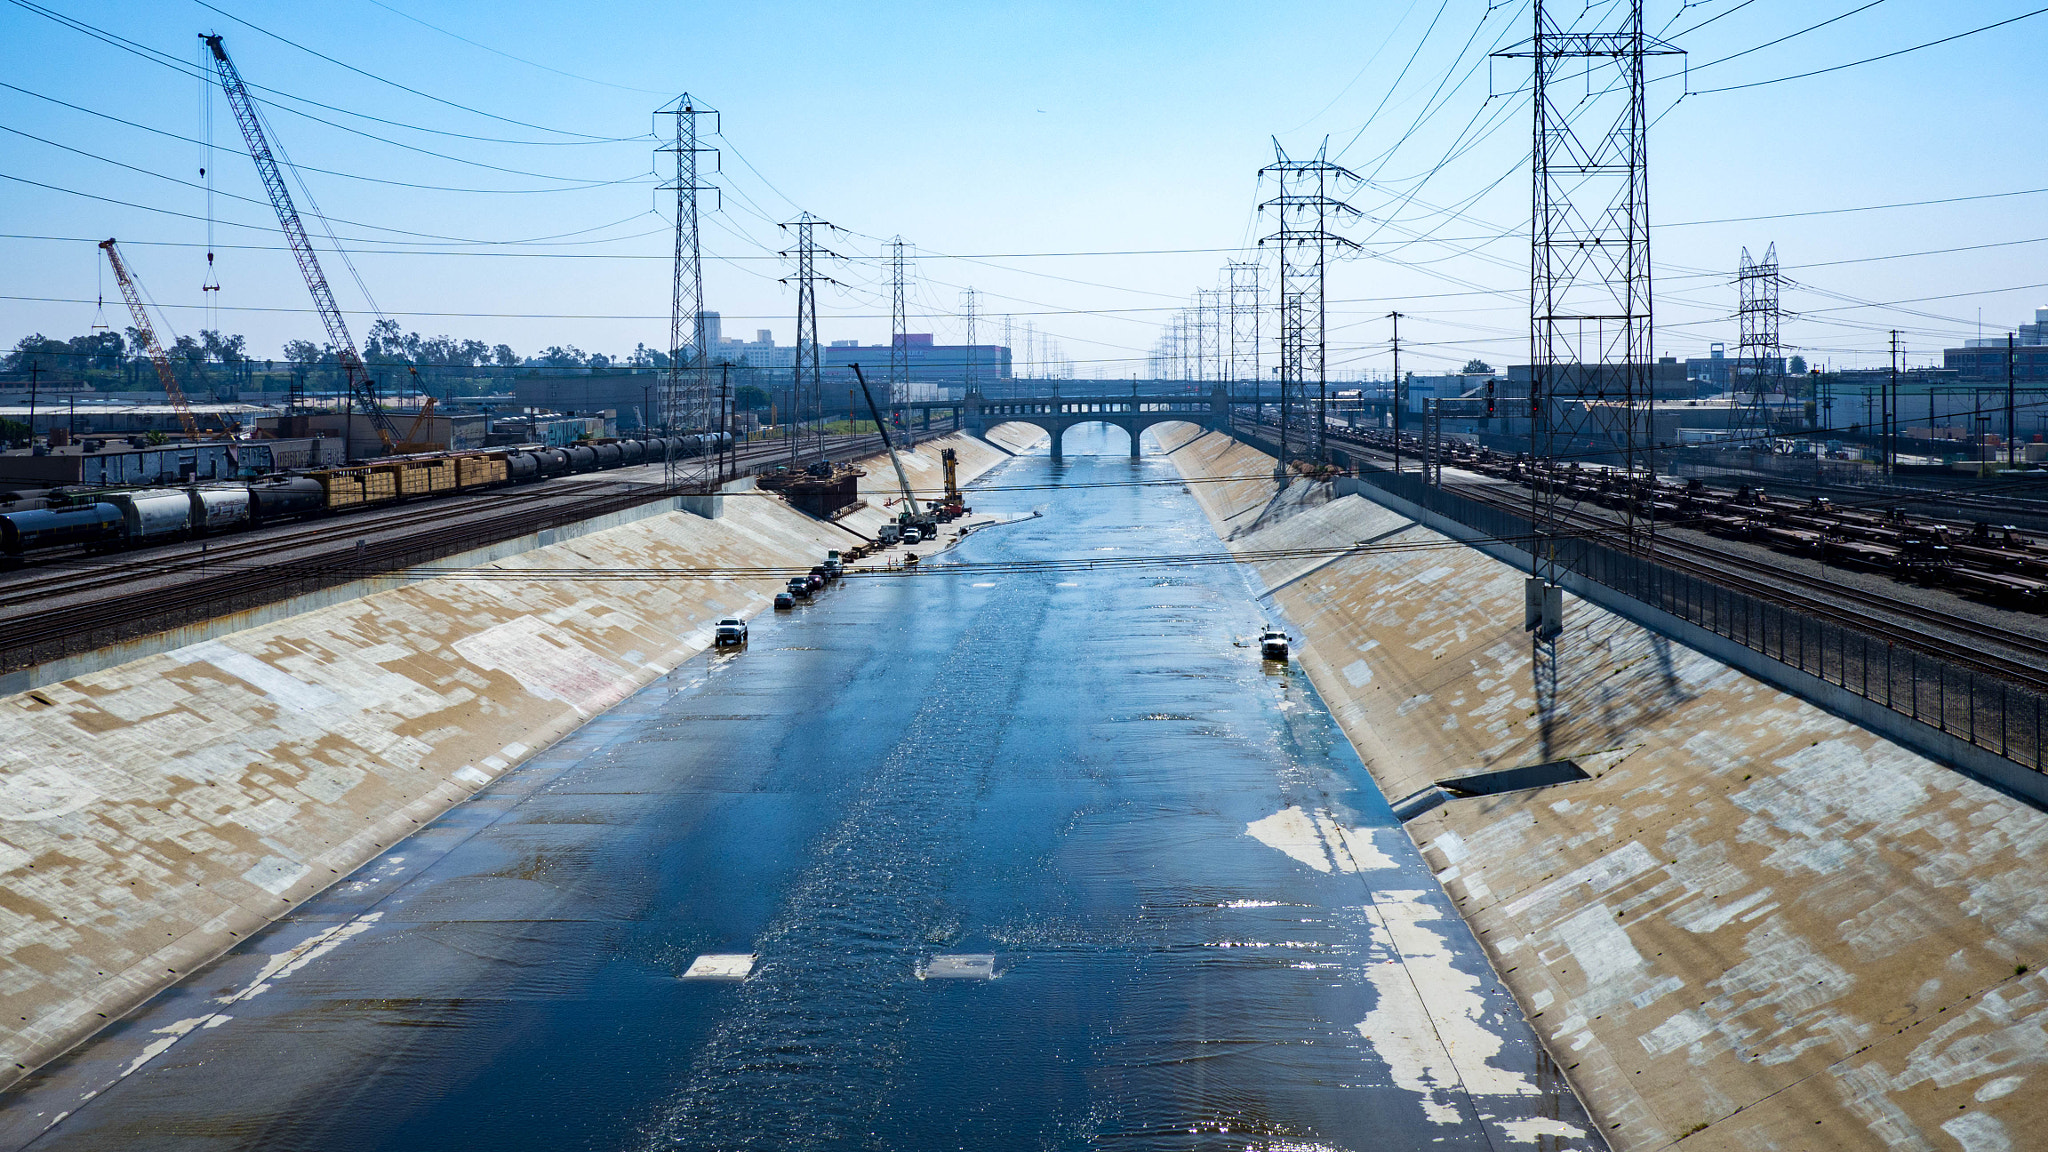 Olympus OM-D E-M10 sample photo. Good to see water in the la river photography